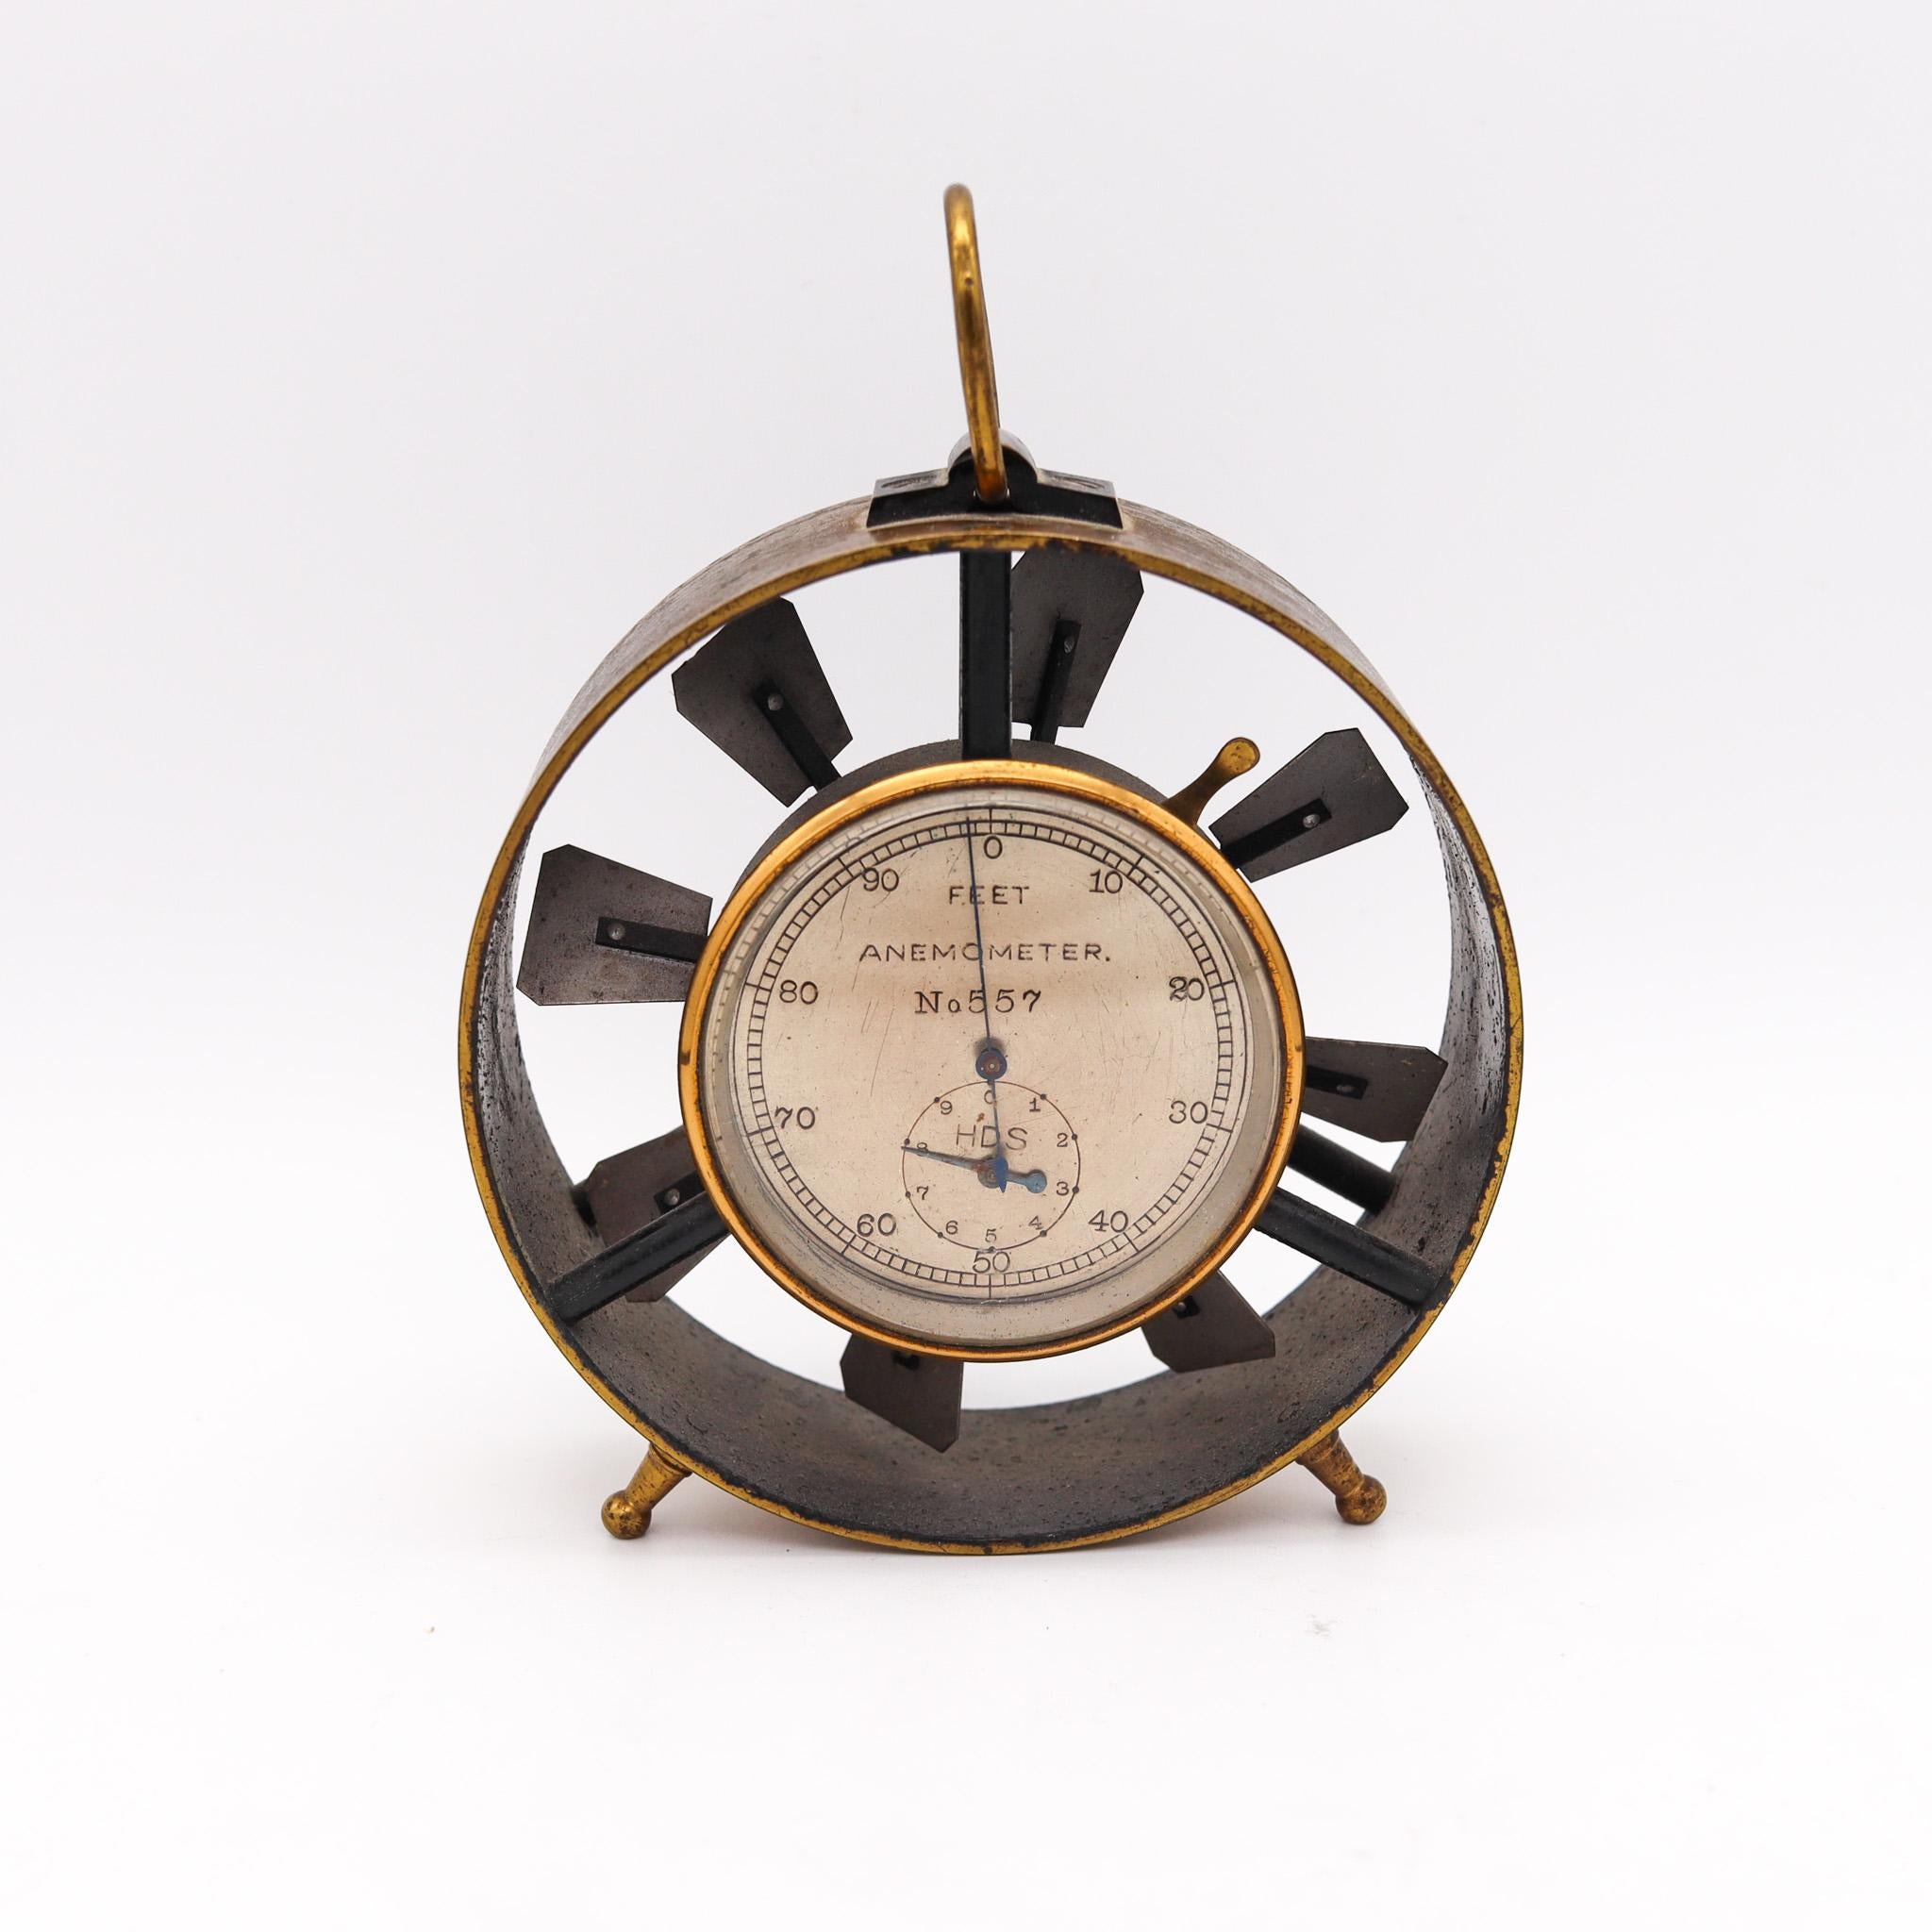 Mechanical desk anemometer in brass.

Very interesting scientific coal mining anemometer, made up back in the 1950's with brass and blackened steel parts. The dial is silvered with black arabic numerals and steel hands. Inscribed FEET ANEMOMETER